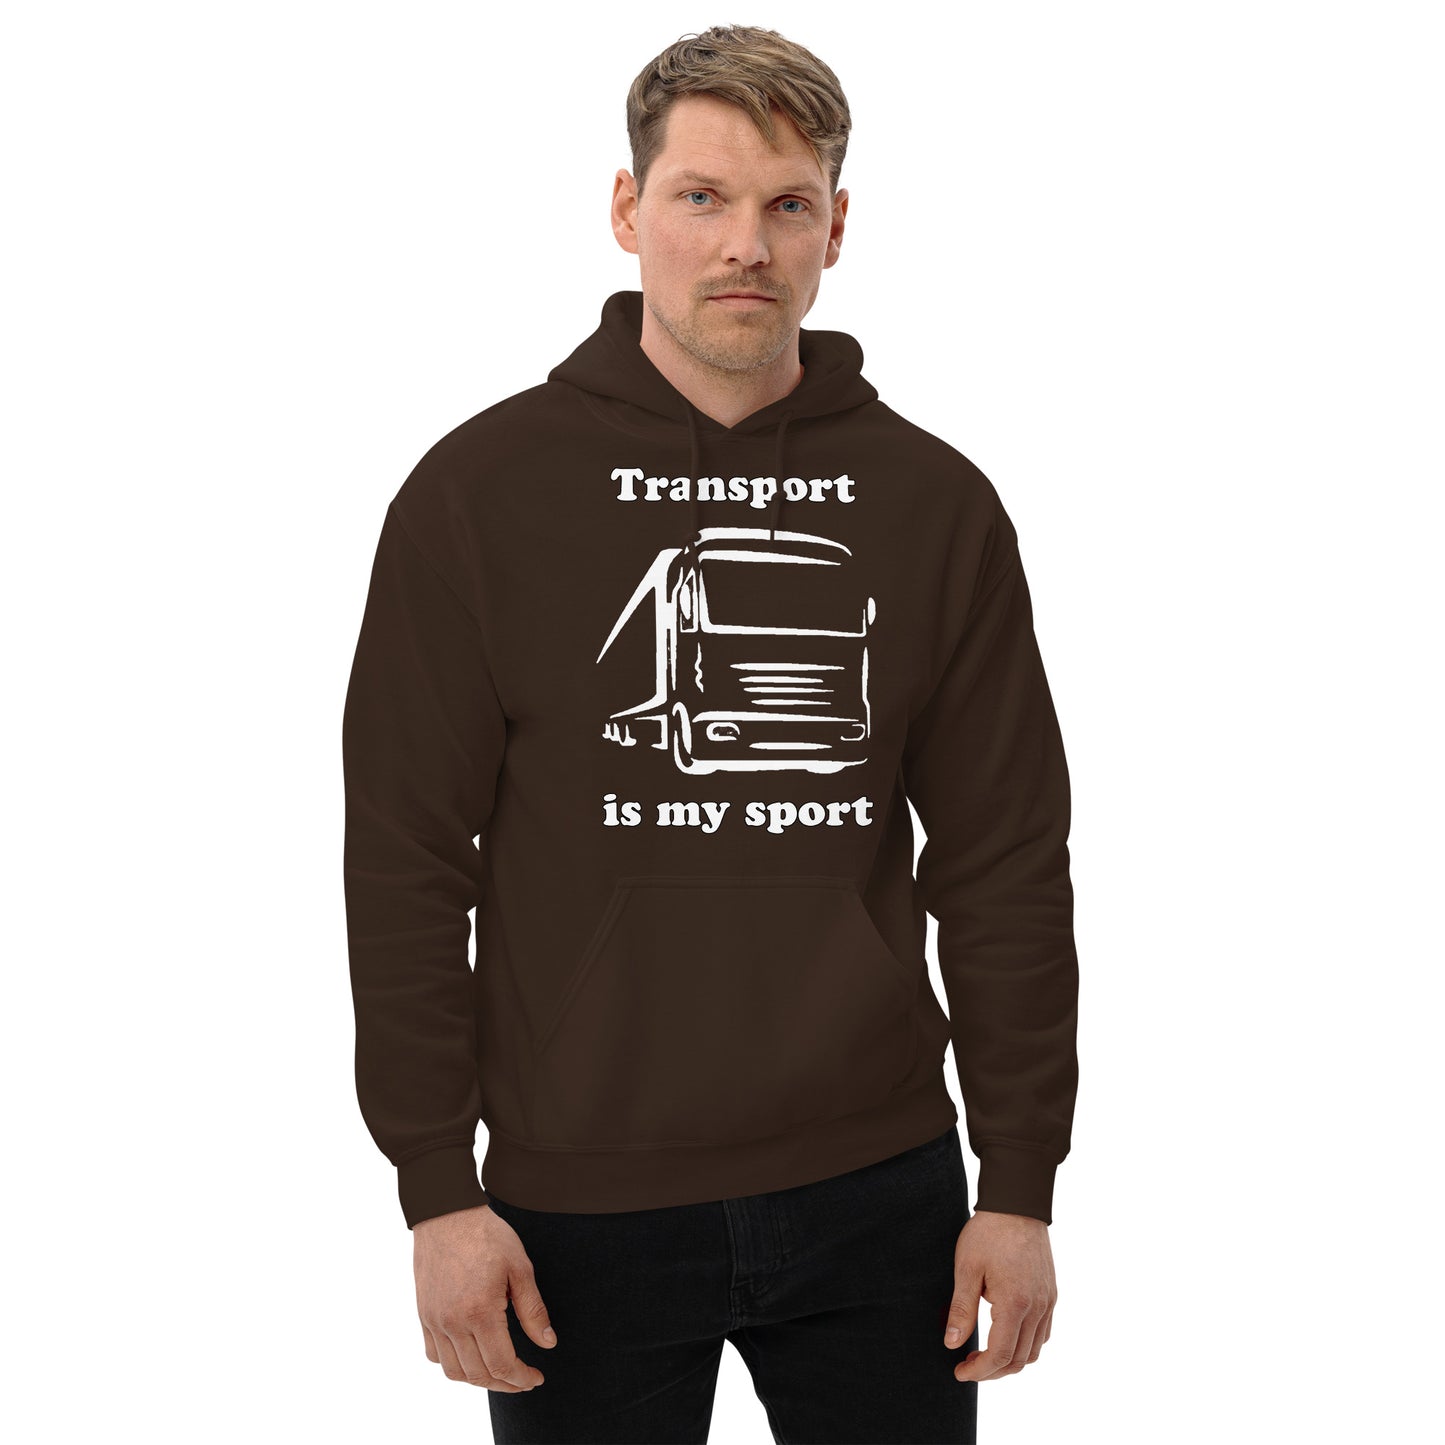 Man with brown hoodie with picture of truck and text "Transport is my sport"